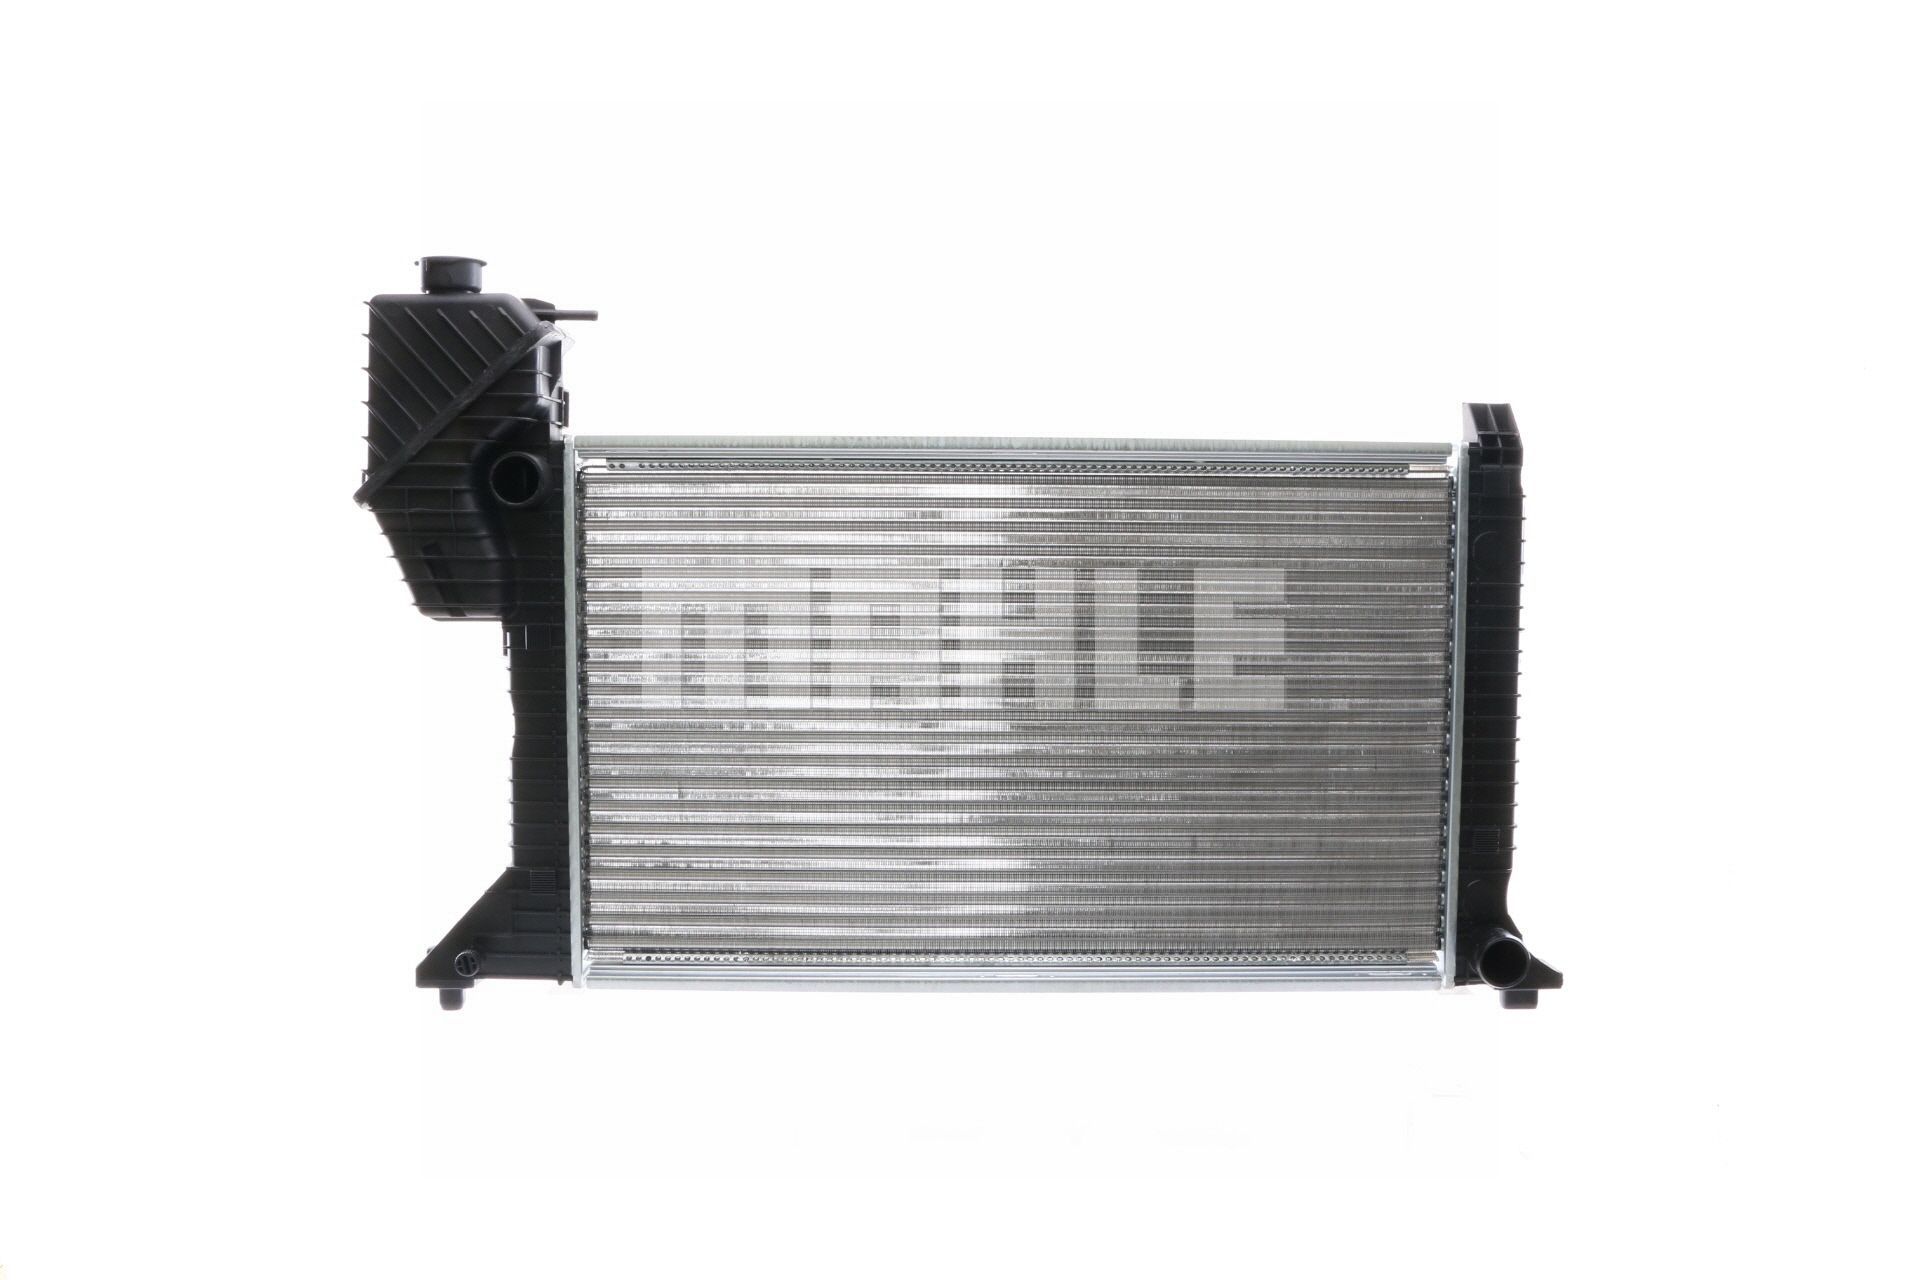 MAHLE ORIGINAL CR 667 000S Engine radiator for vehicles without air conditioning, 680 x 398 x 34 mm, Manual Transmission, Mechanically jointed cooling fins